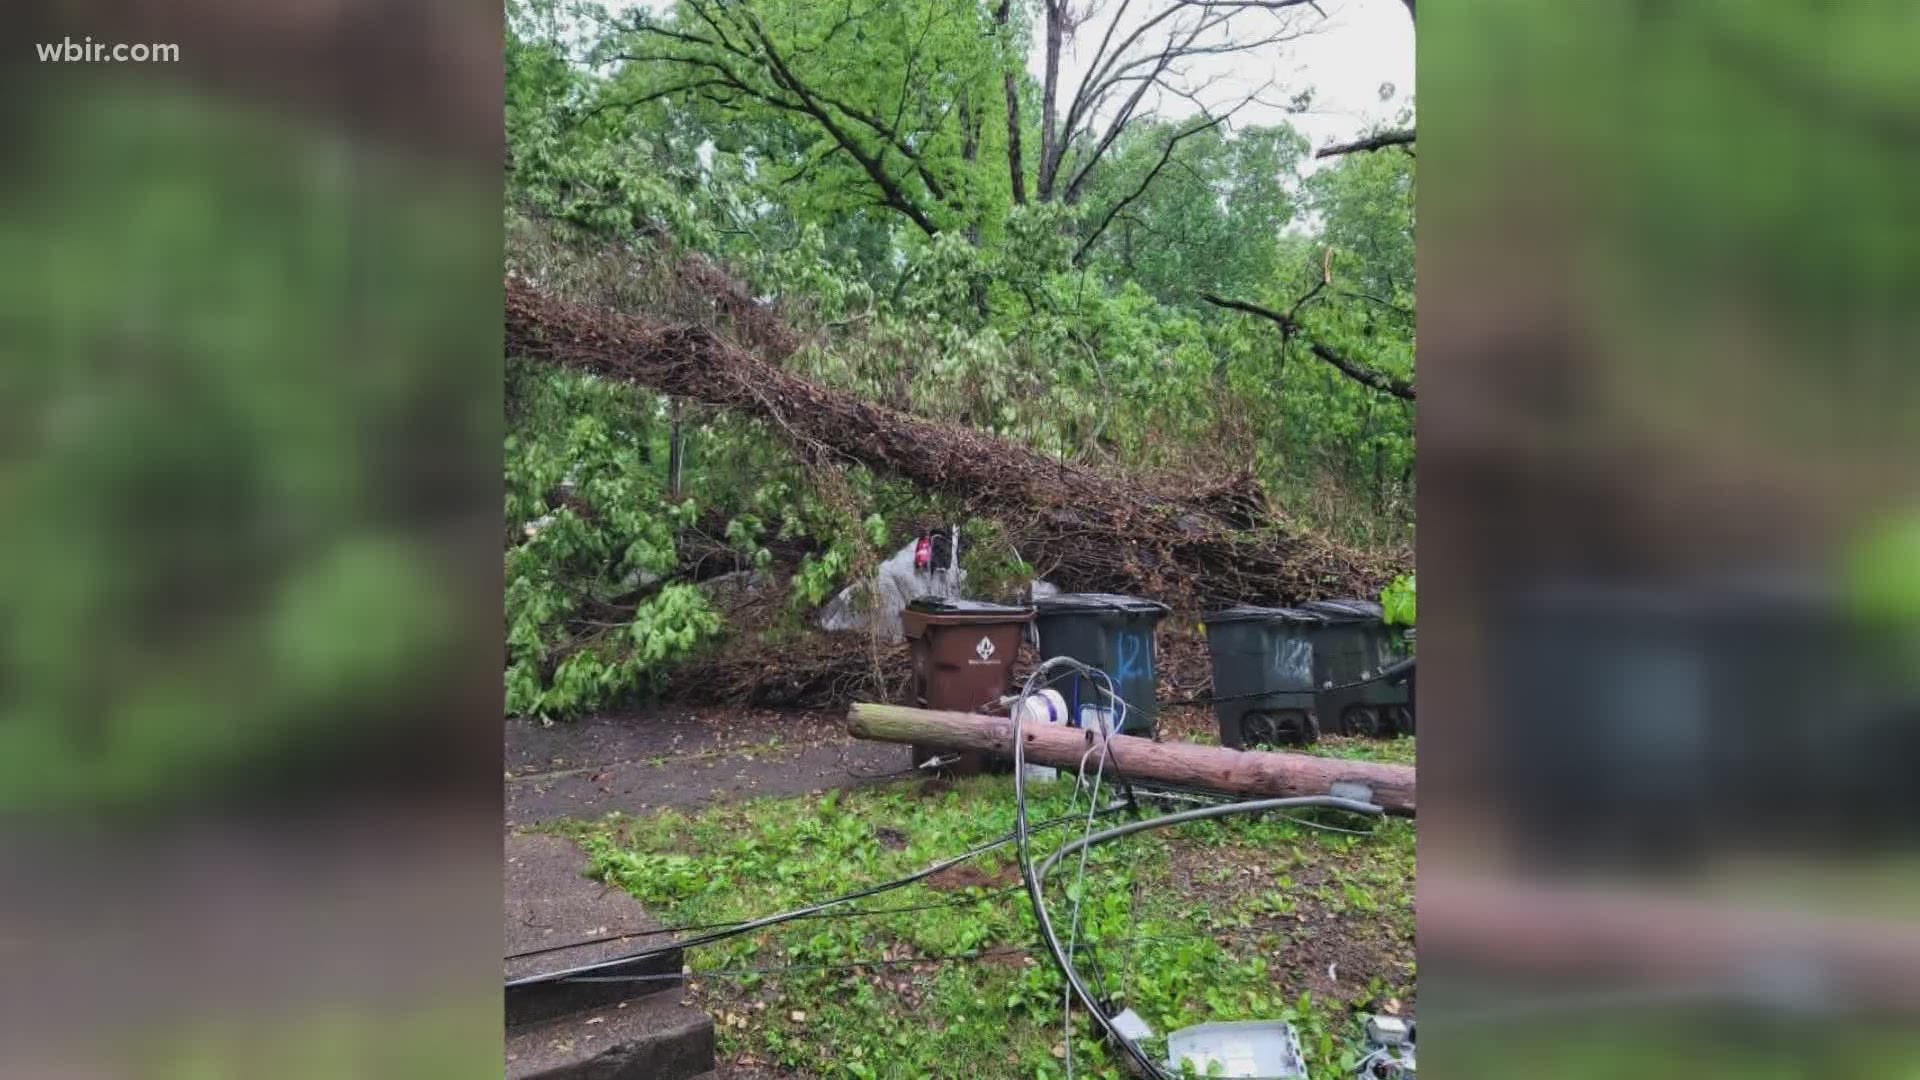 A tornado may have touched down in Cumberland County this morning.